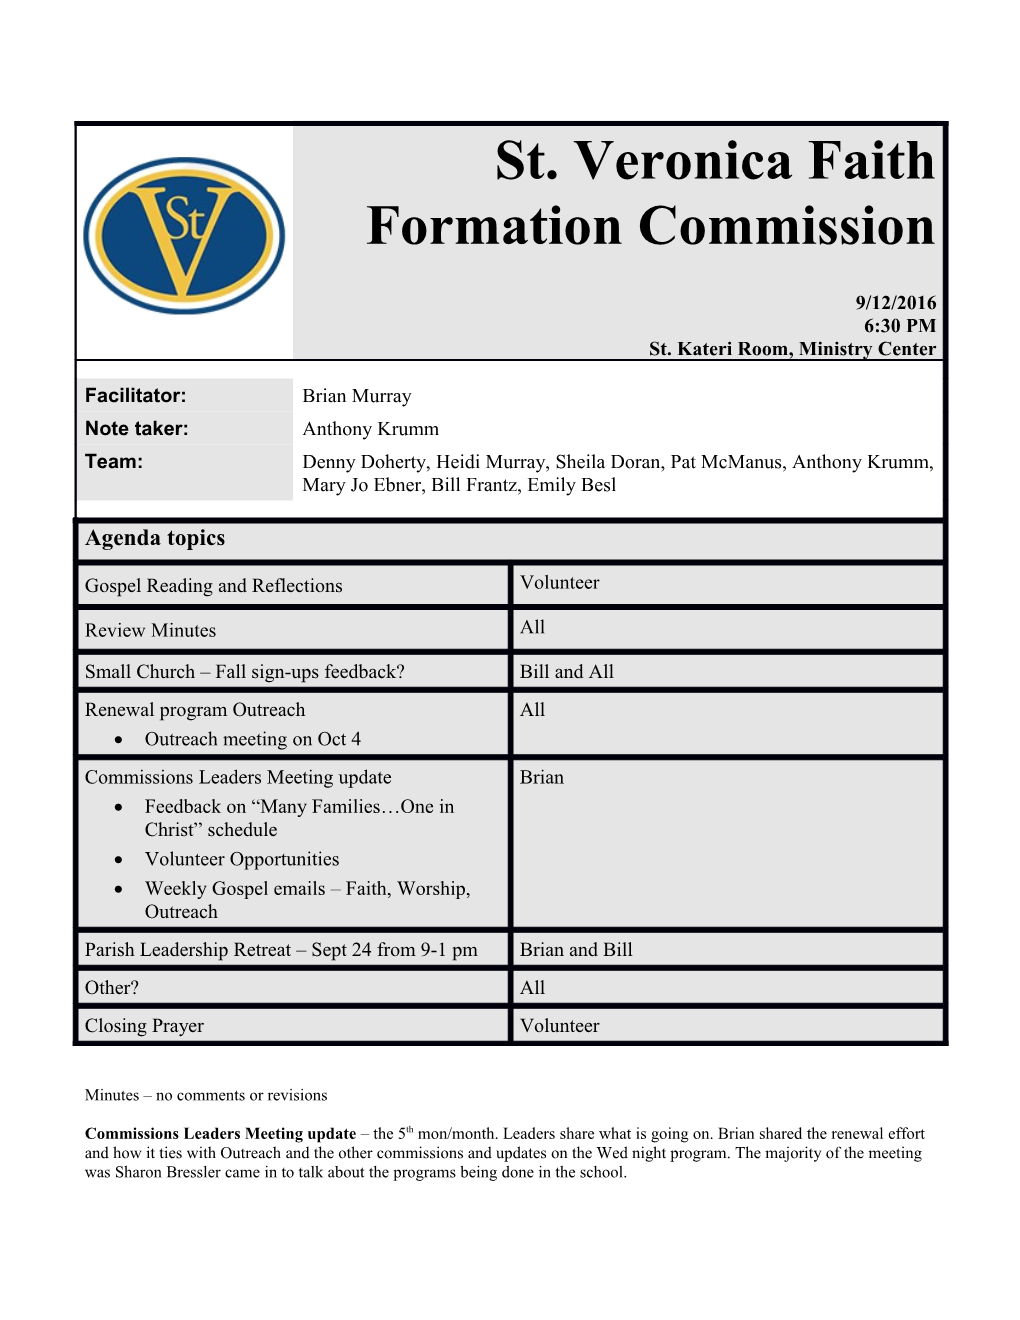 St. Veronica Faith Formation Commission